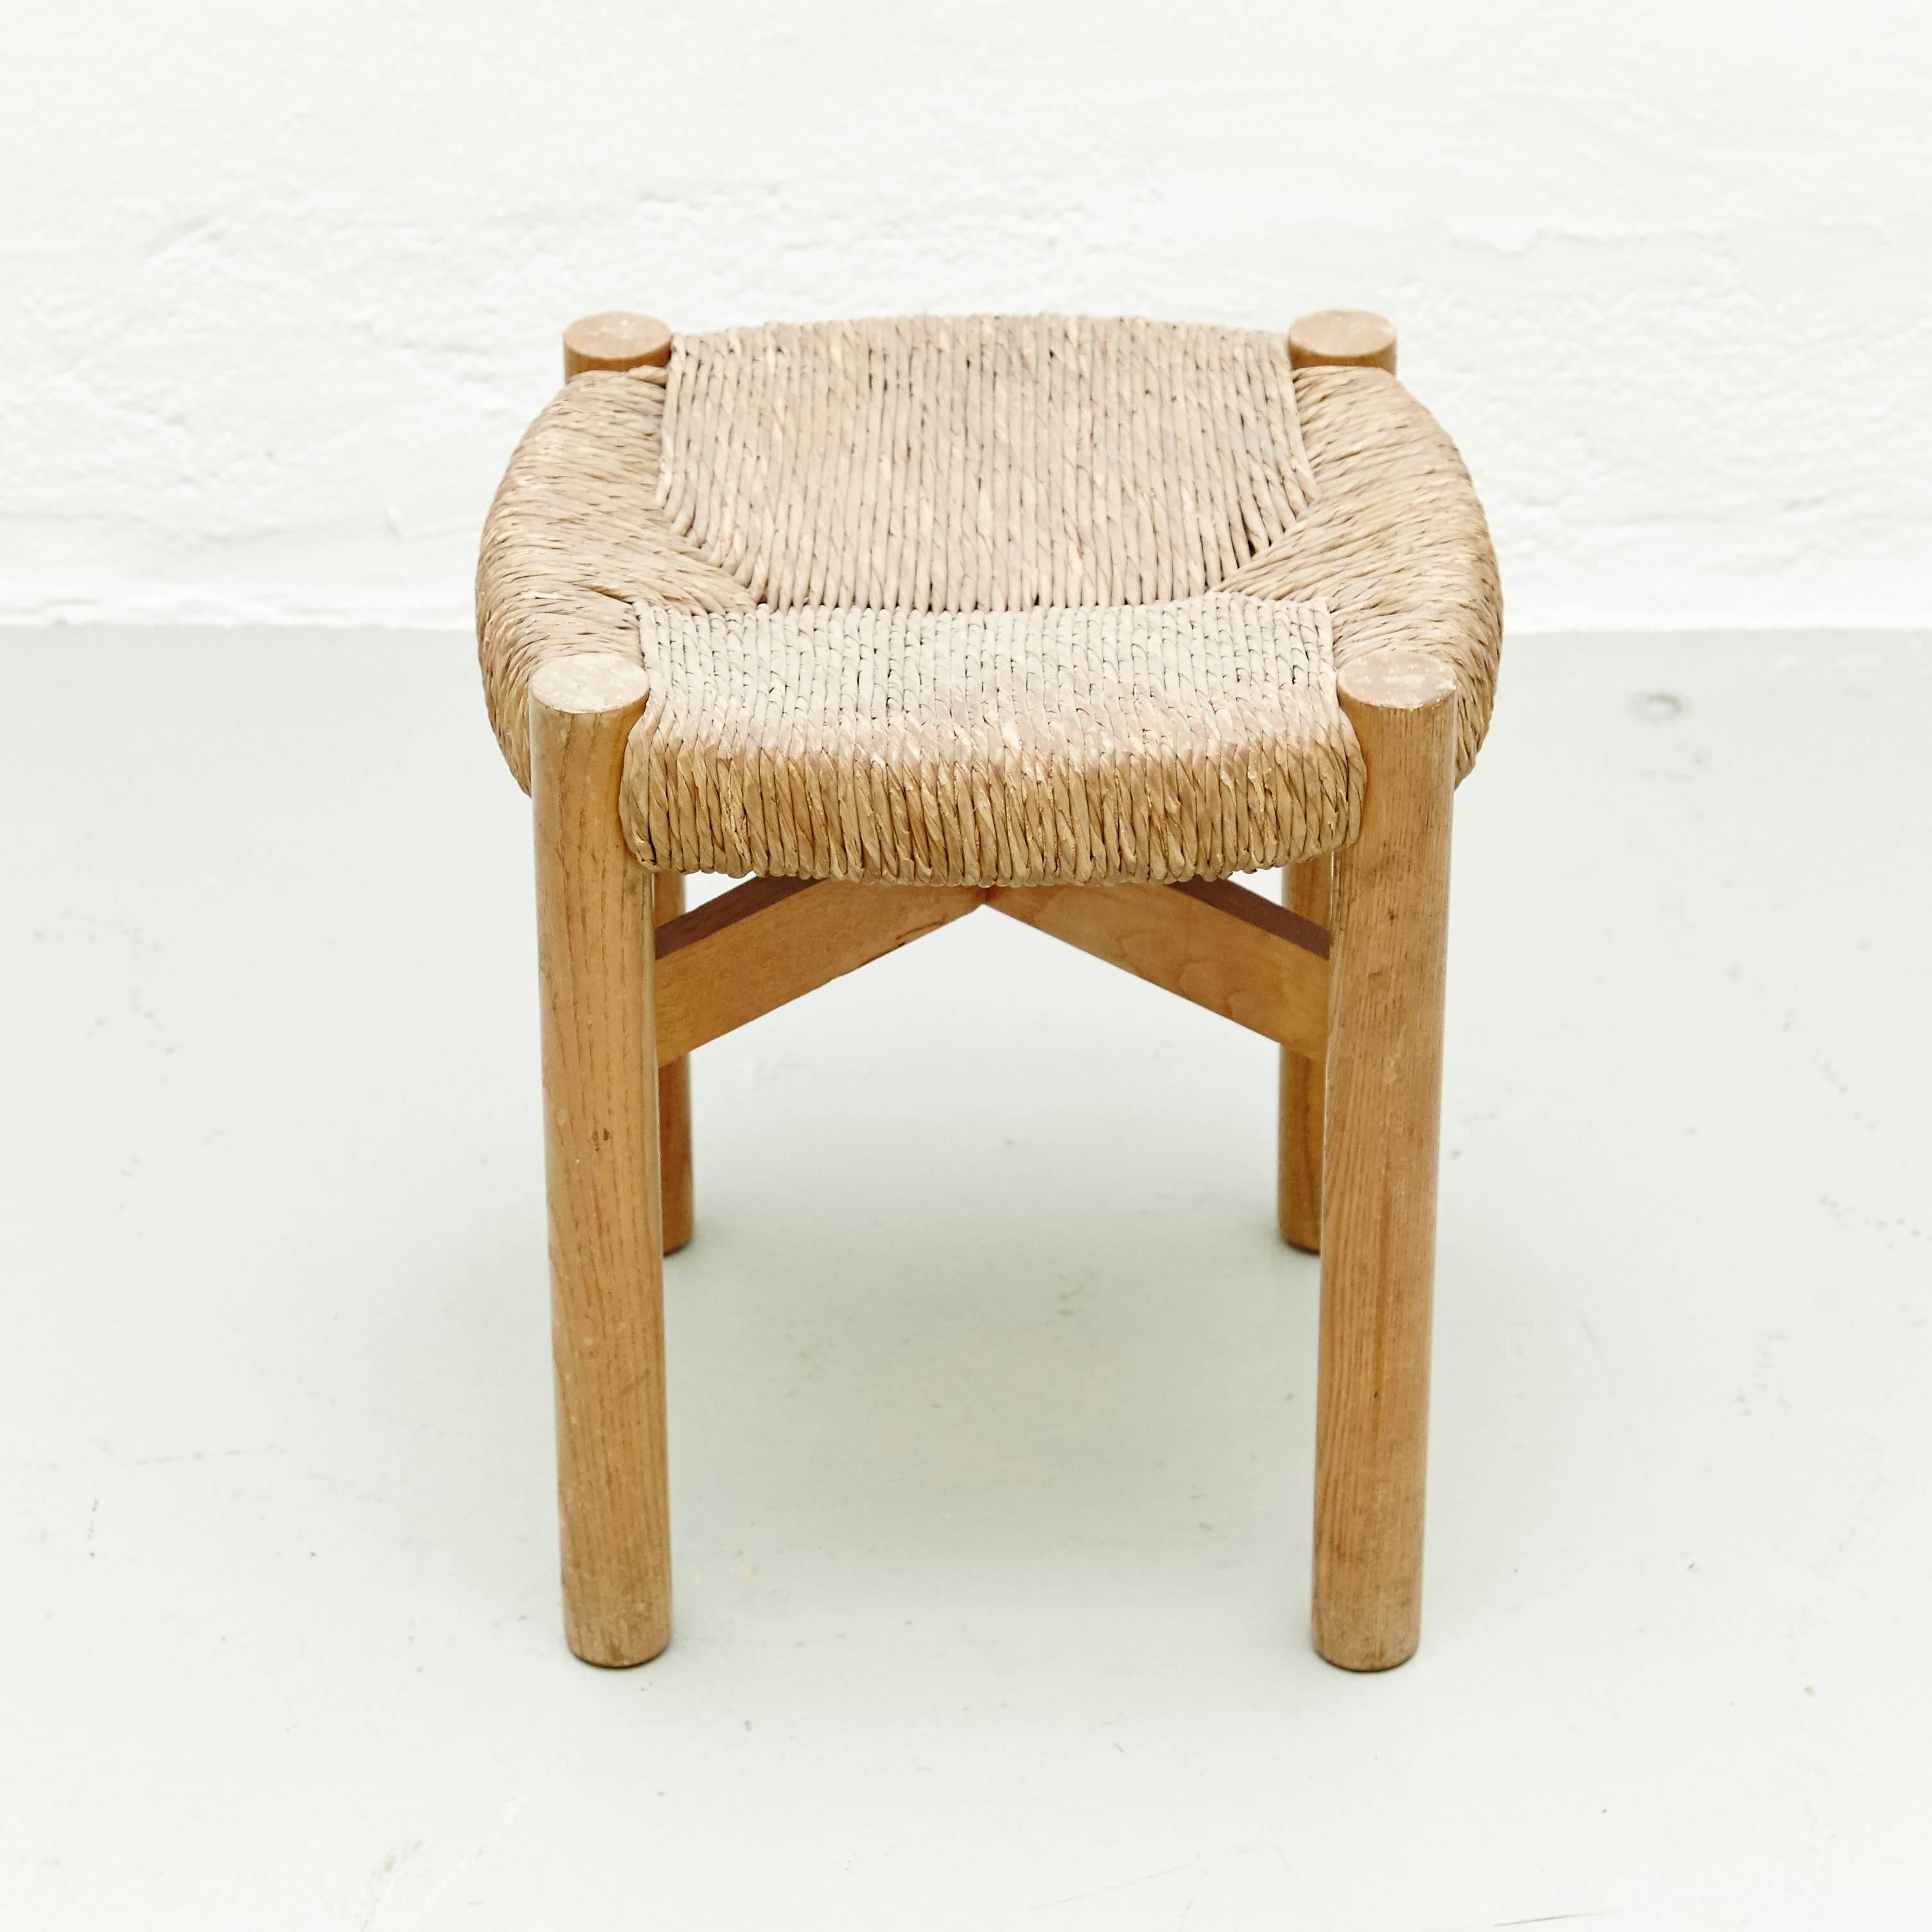 Stool, model meribel, designed by Charlotte Perriand circa 1950, manufactured in France.
Wood and rattan.

In good original condition, with minor wear consistent with age and use, preserving a beautiful patina.

Charlotte Perriand (1903-1999)